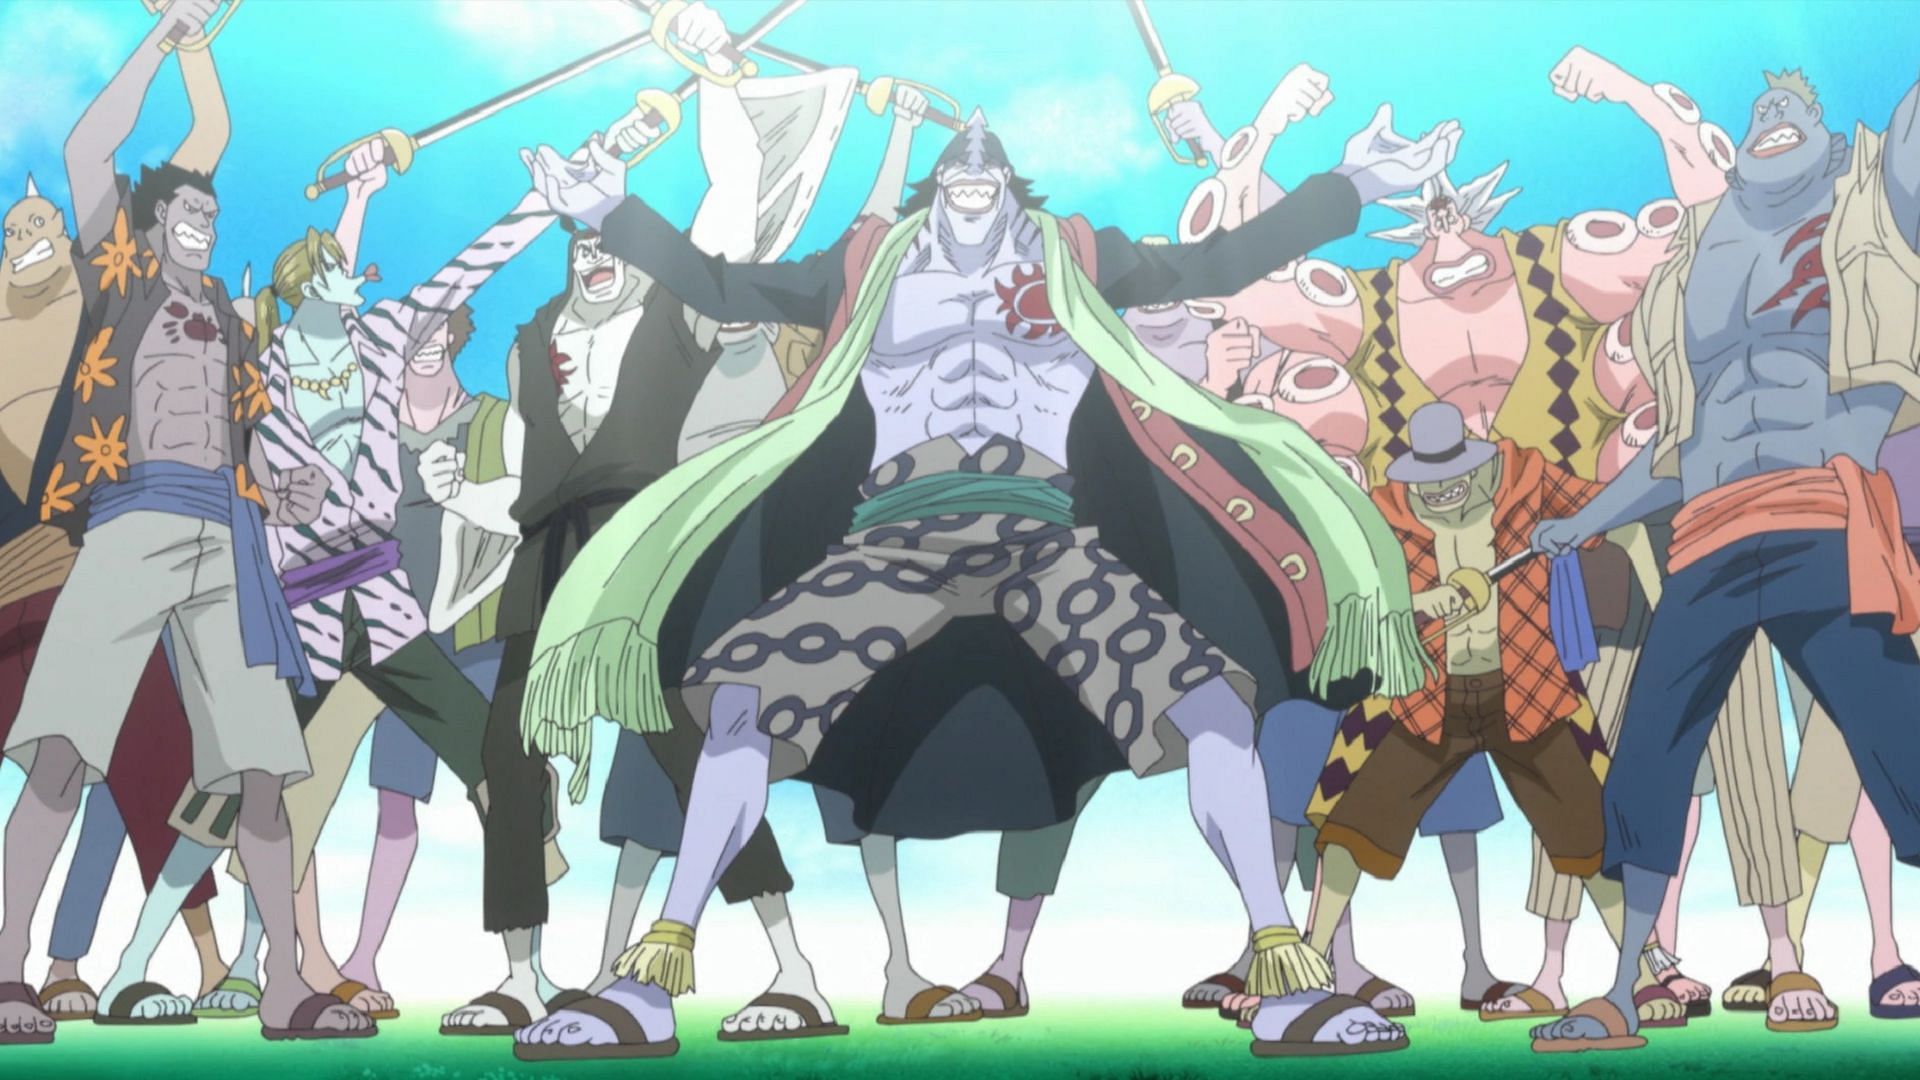 Some Fish-Men as seen in One Piece (Image via Toei Animation)